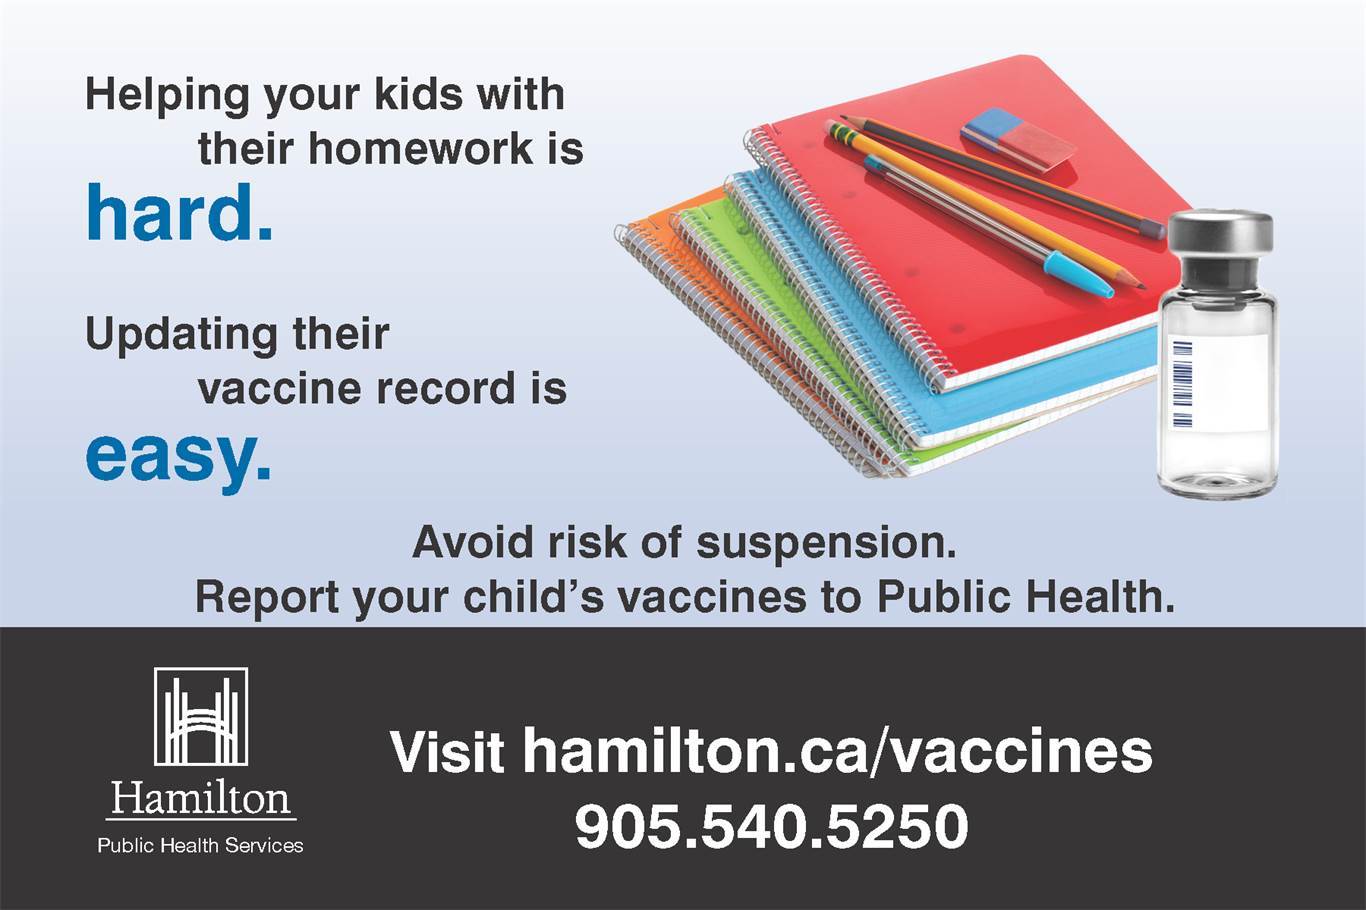 Avoid risk of suspension. Report your child’s vaccines to Public Health.